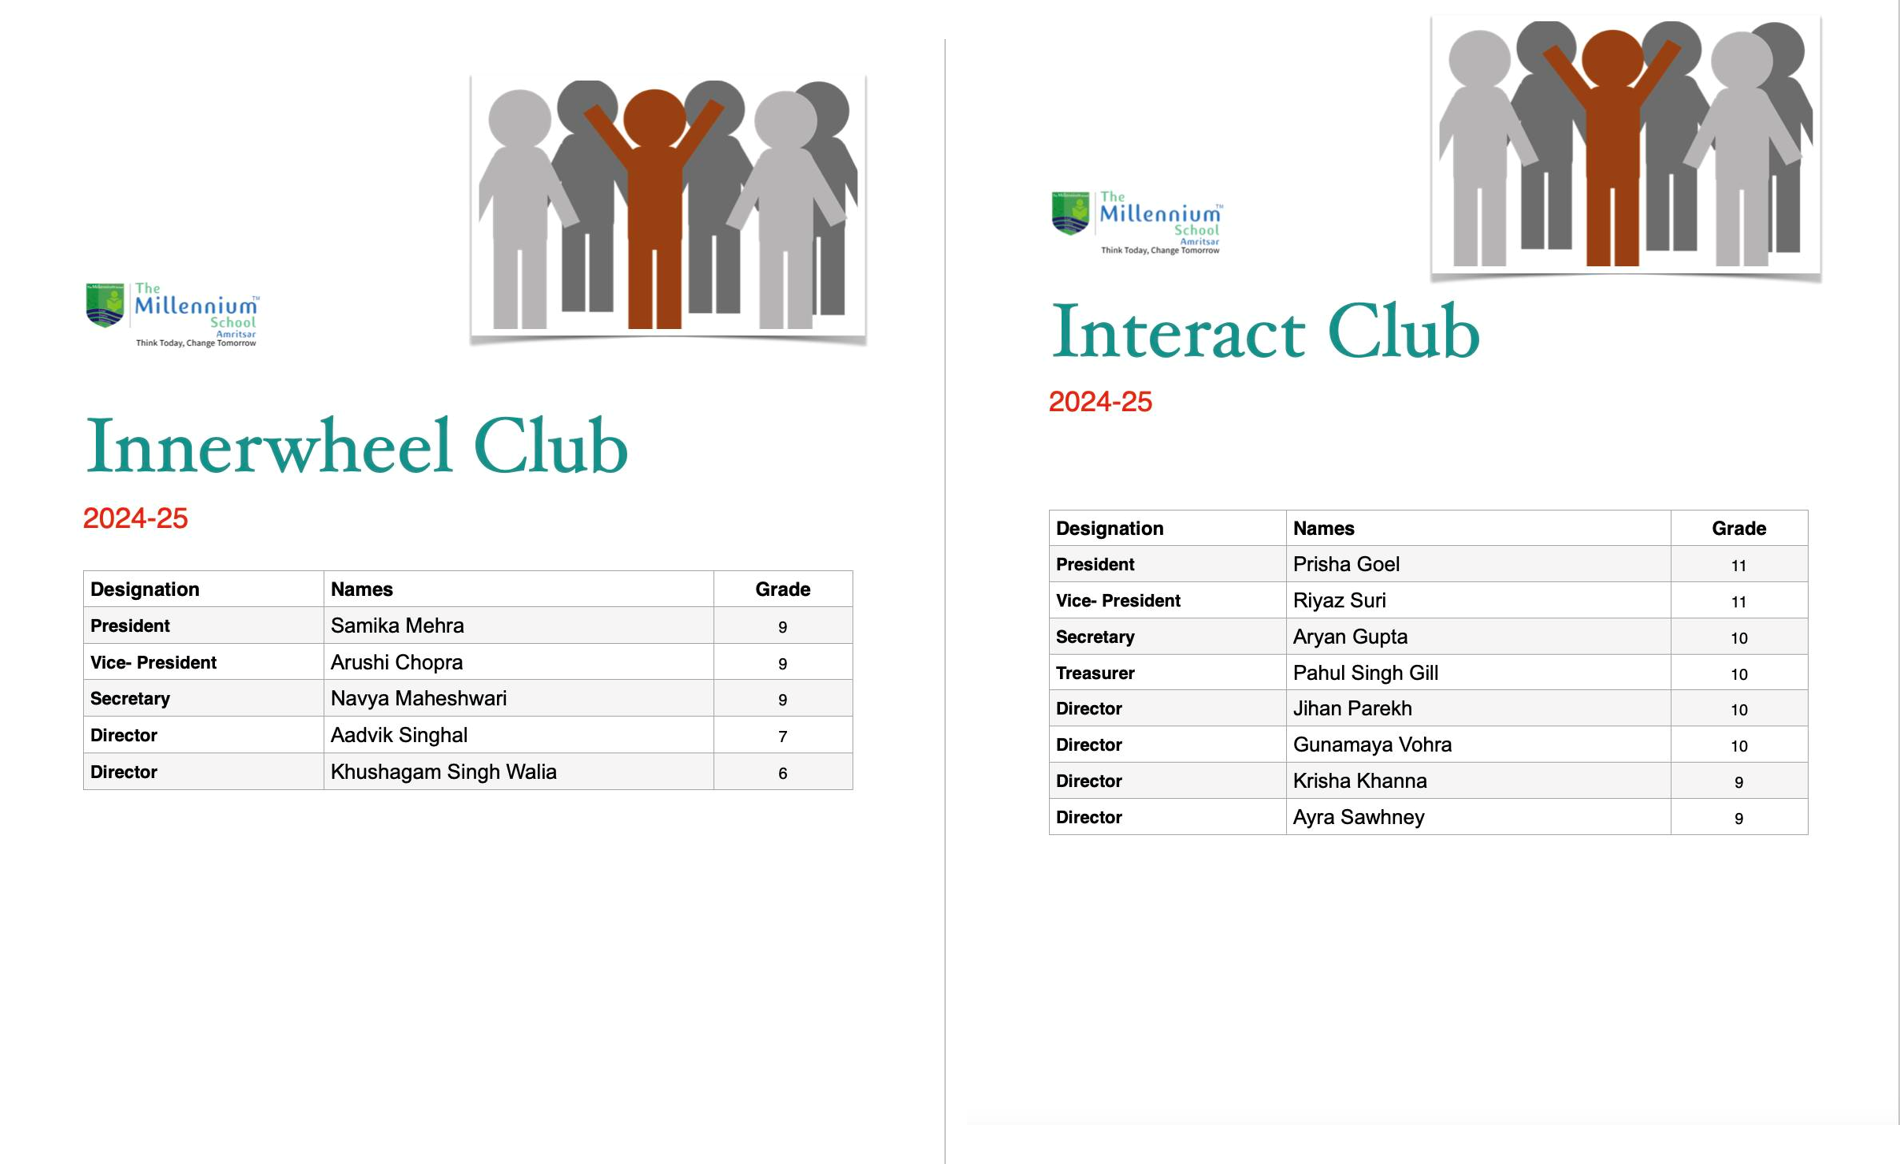 Student Council Result (Interact Club and Inner Wheel Club)